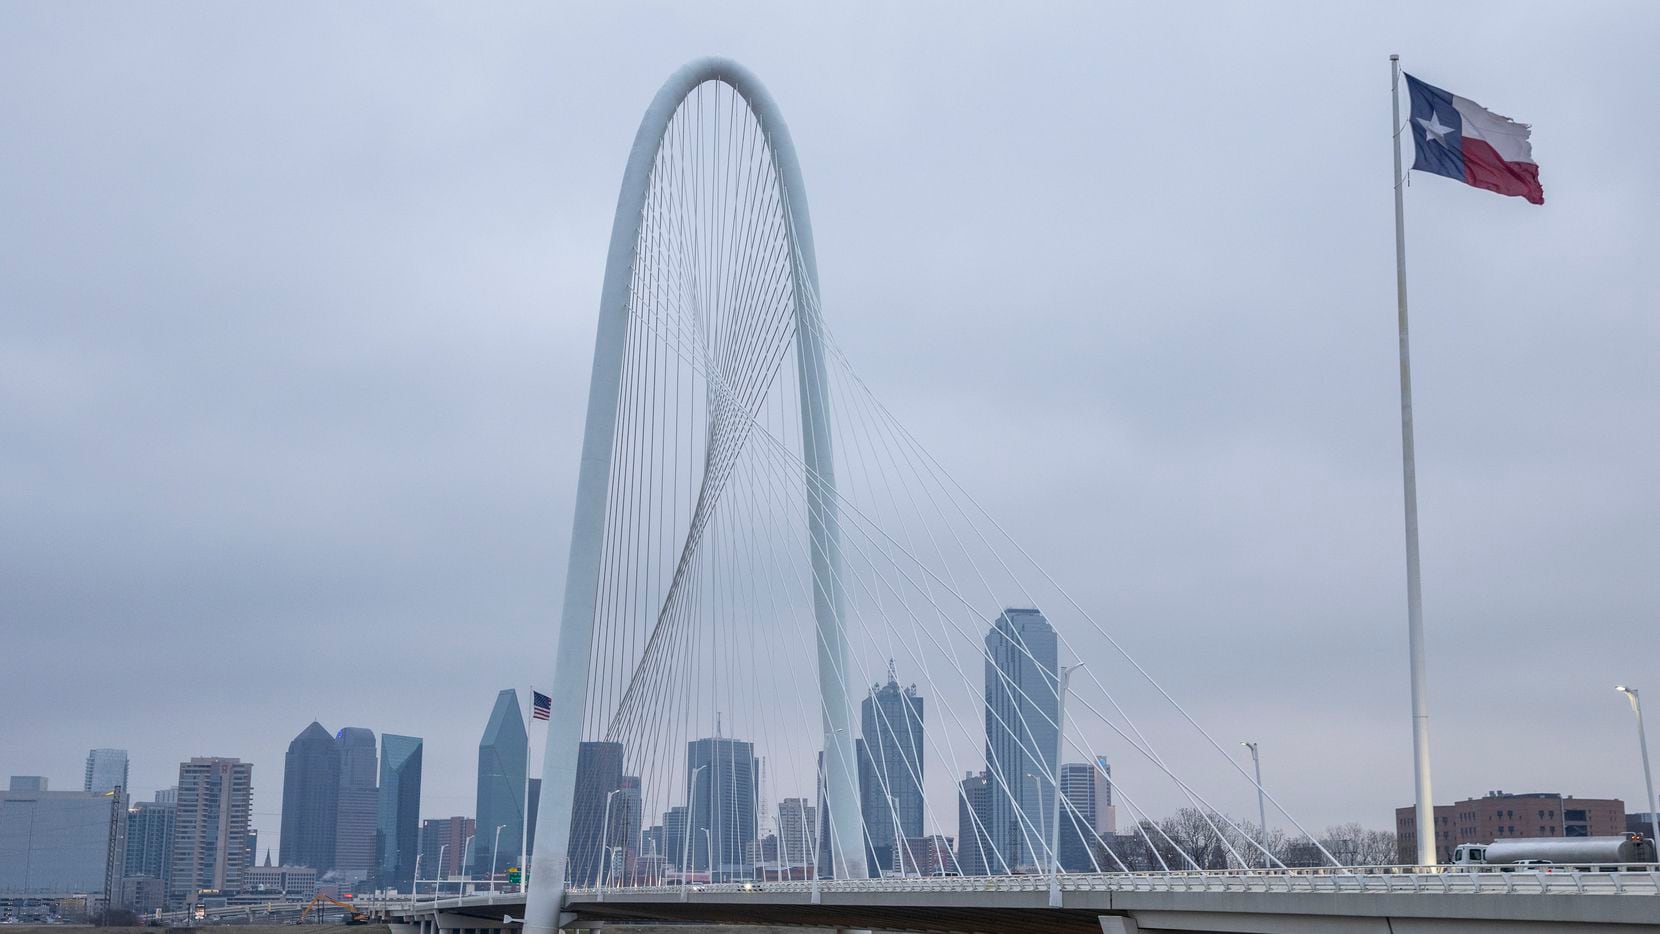 Cold, gray skies hung over the Dallas skyline in advance of what's expected to be a major...